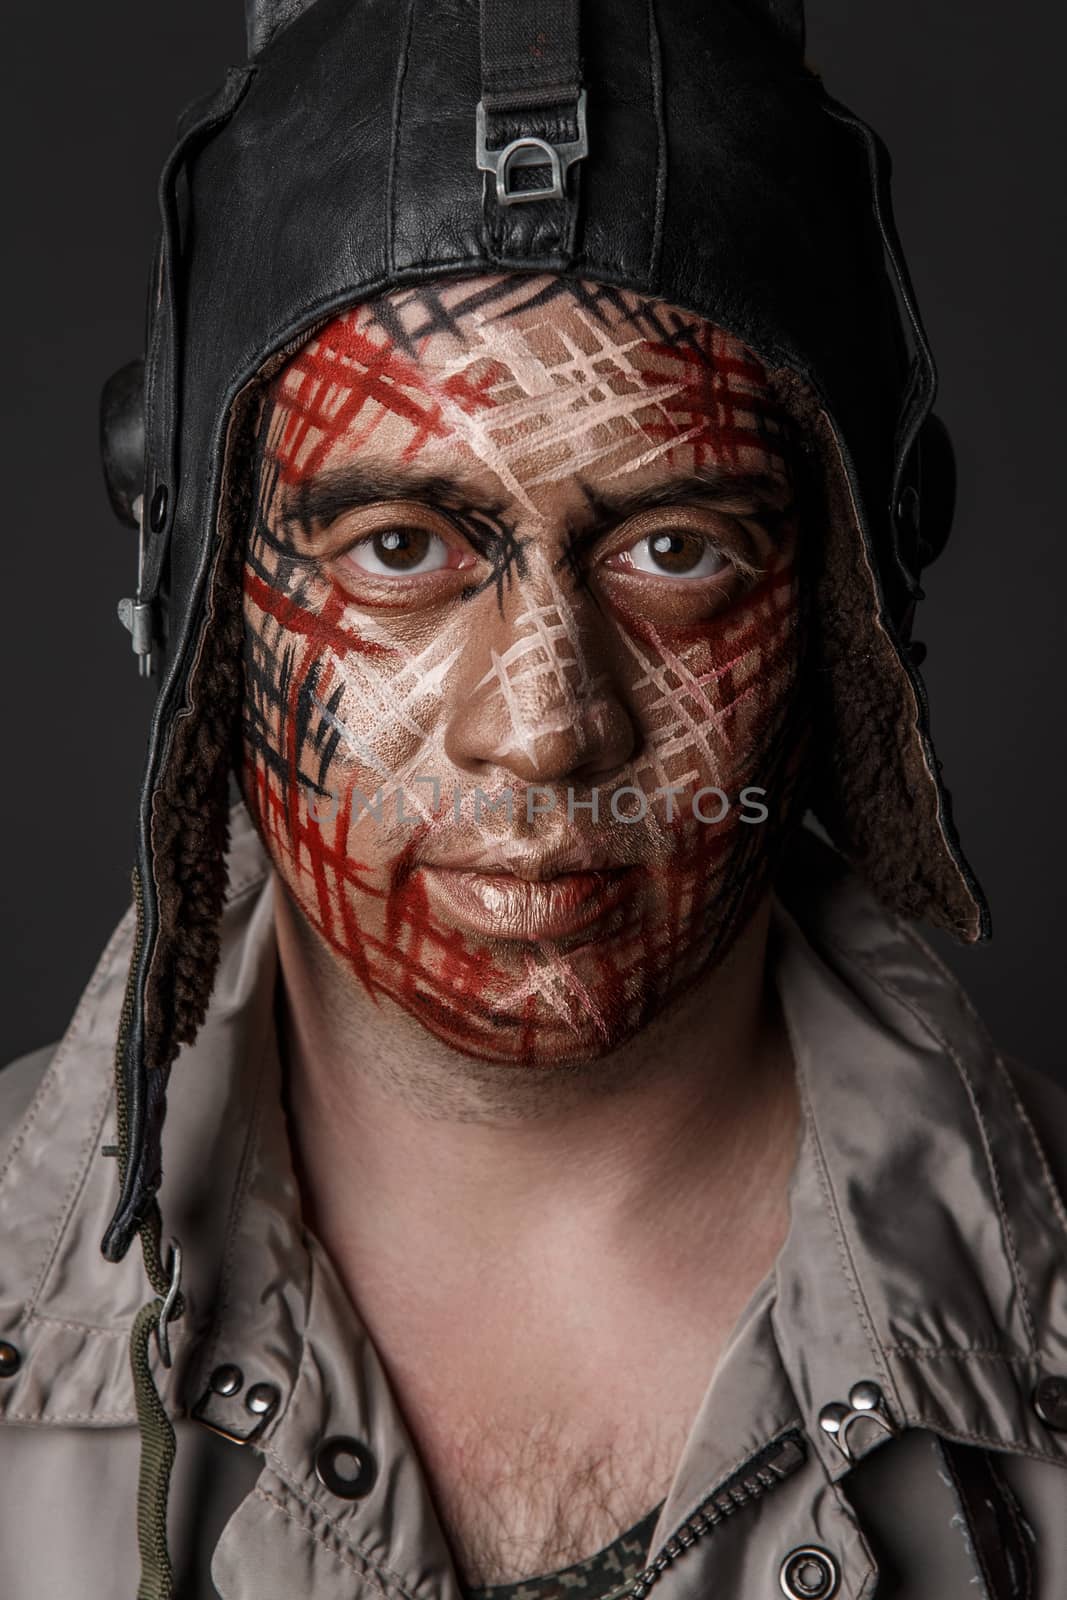 Creative and Funny Military Style Camouflage on Tankman Face by Multipedia